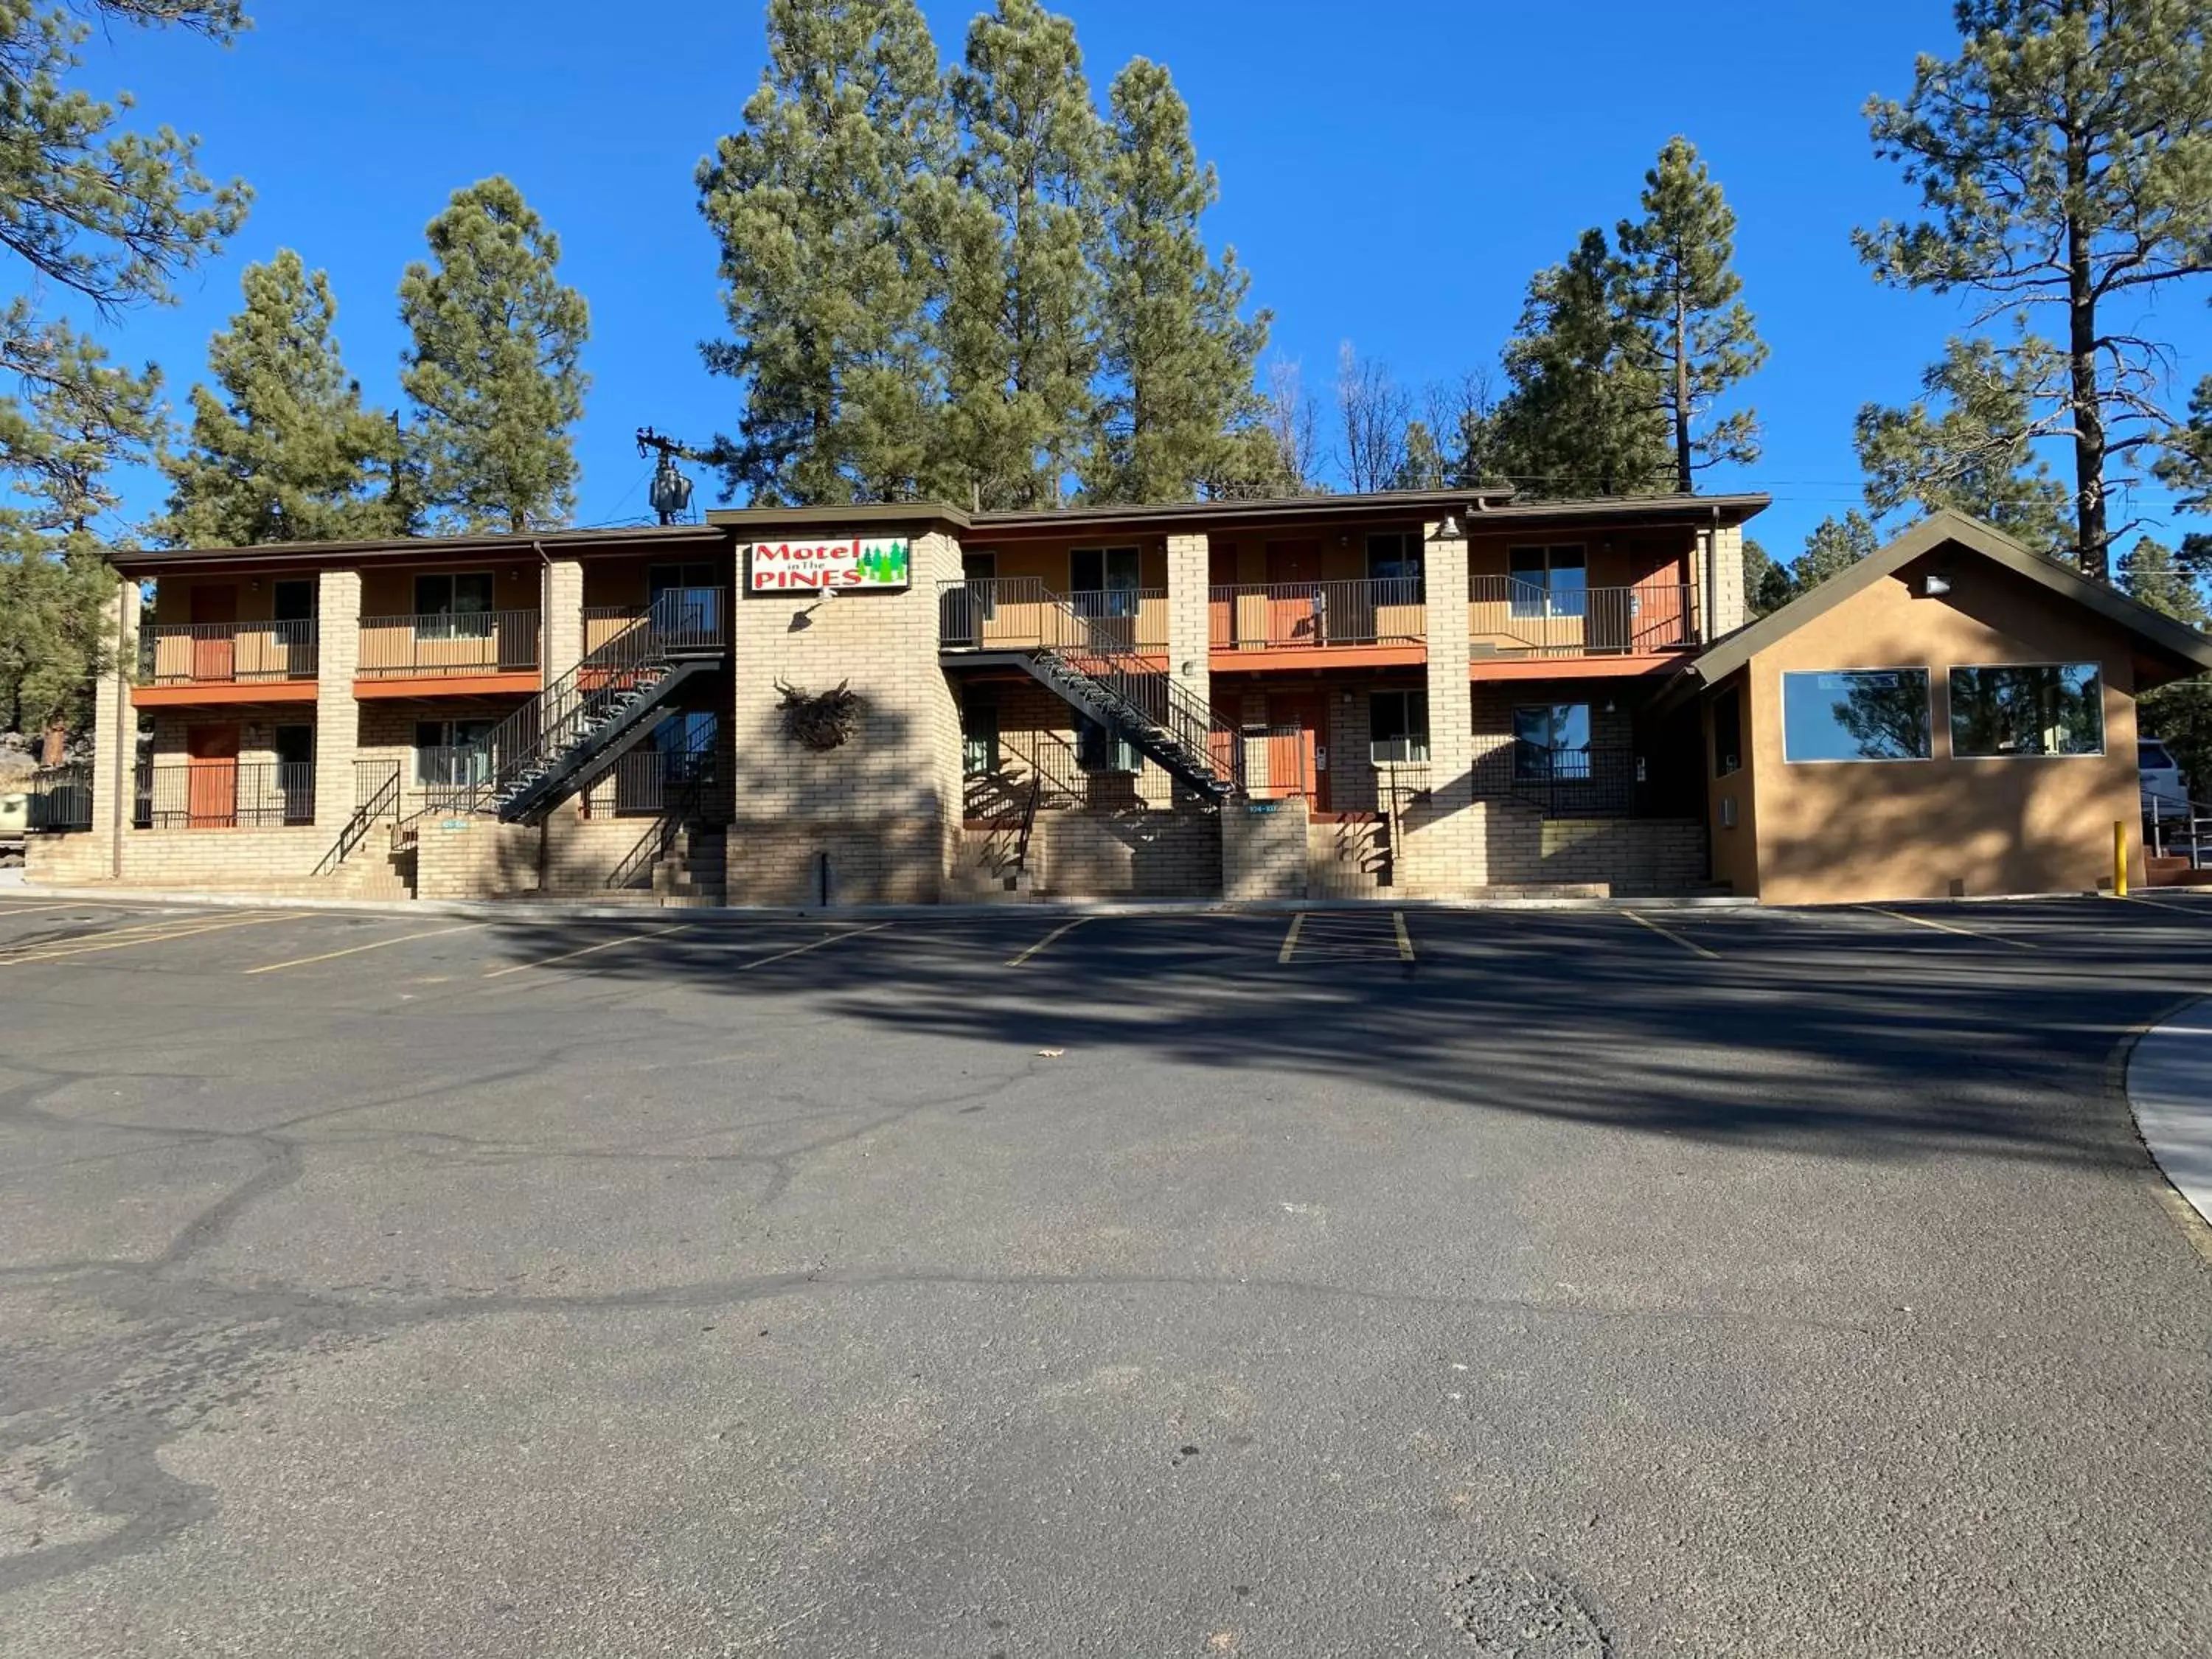 Property Building in Motel In The Pines